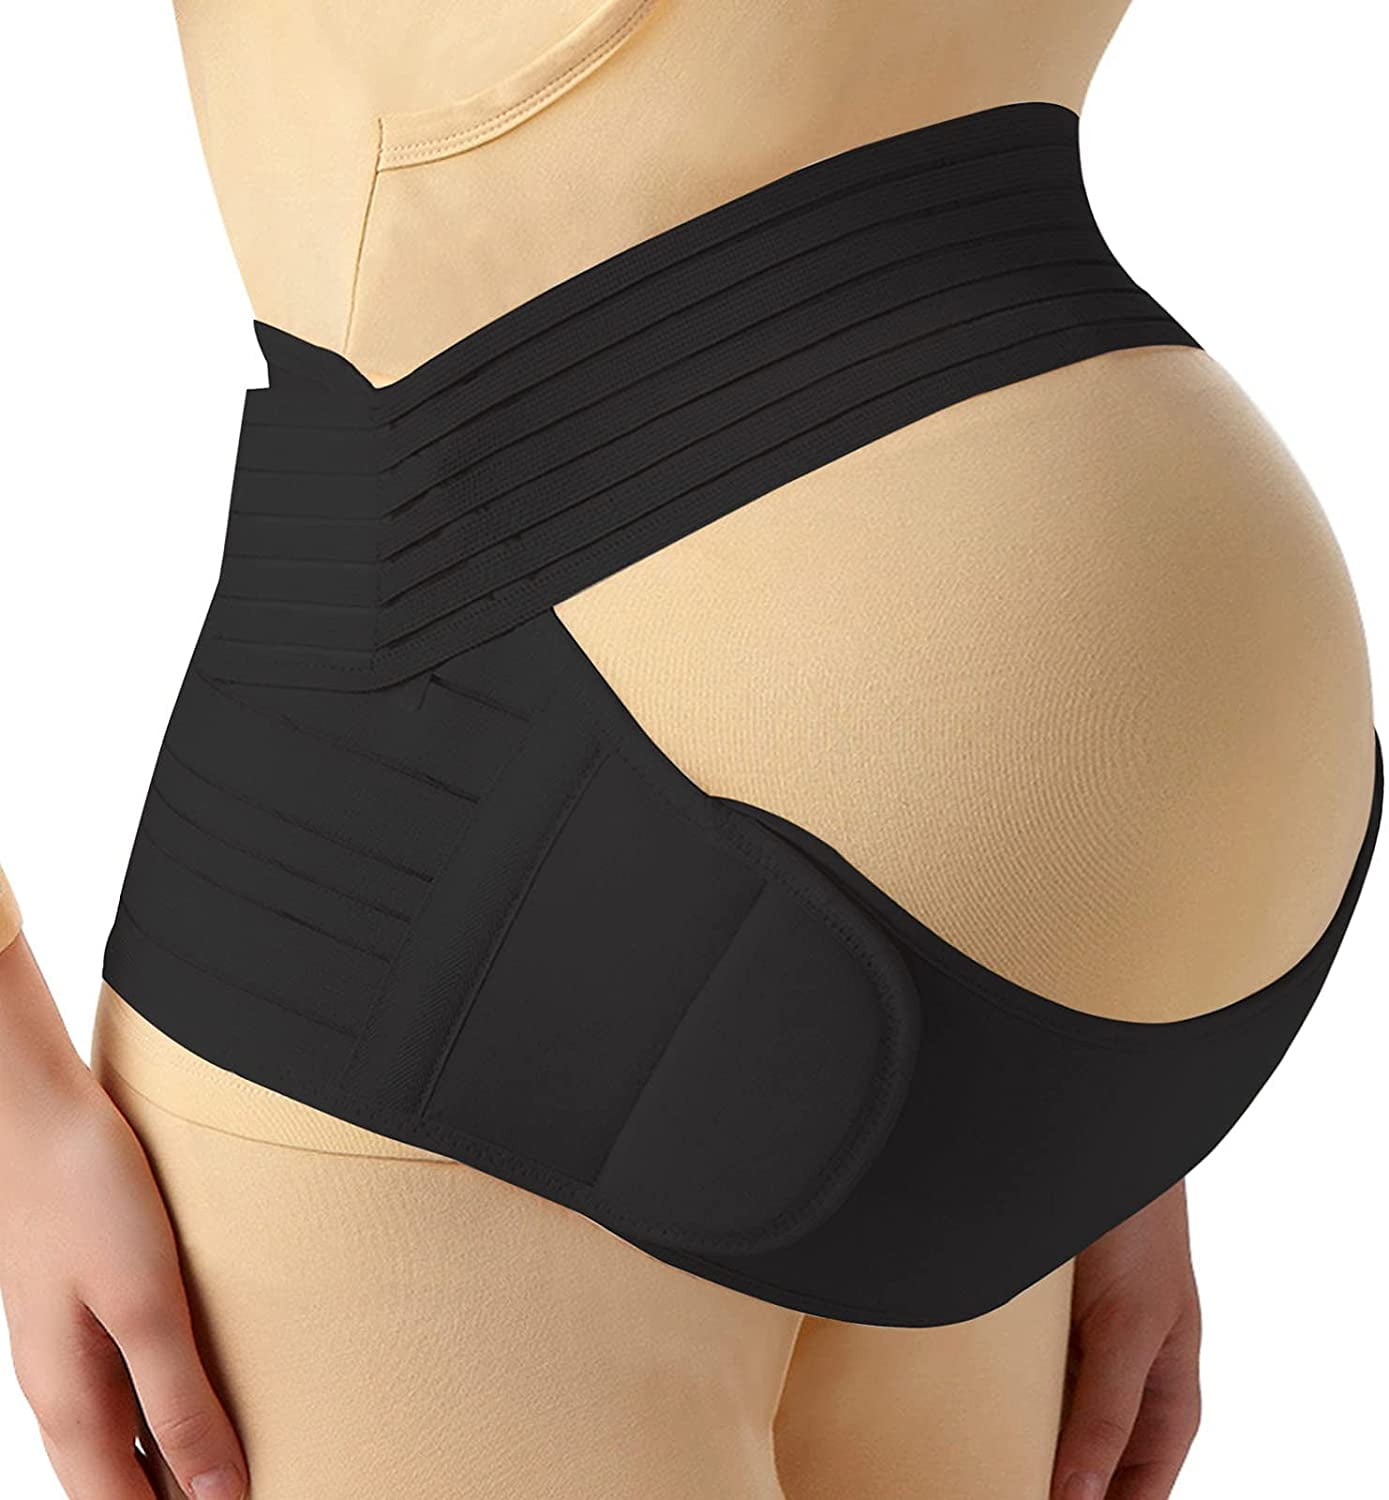 llfioreemio Pregnancy Belt, 3-in-1 Maternity Belt Pregnancy Support Band  with Belly Band for Pain Relief and Postpartum Recovery, Lightweight  Breathable Adjustable. 